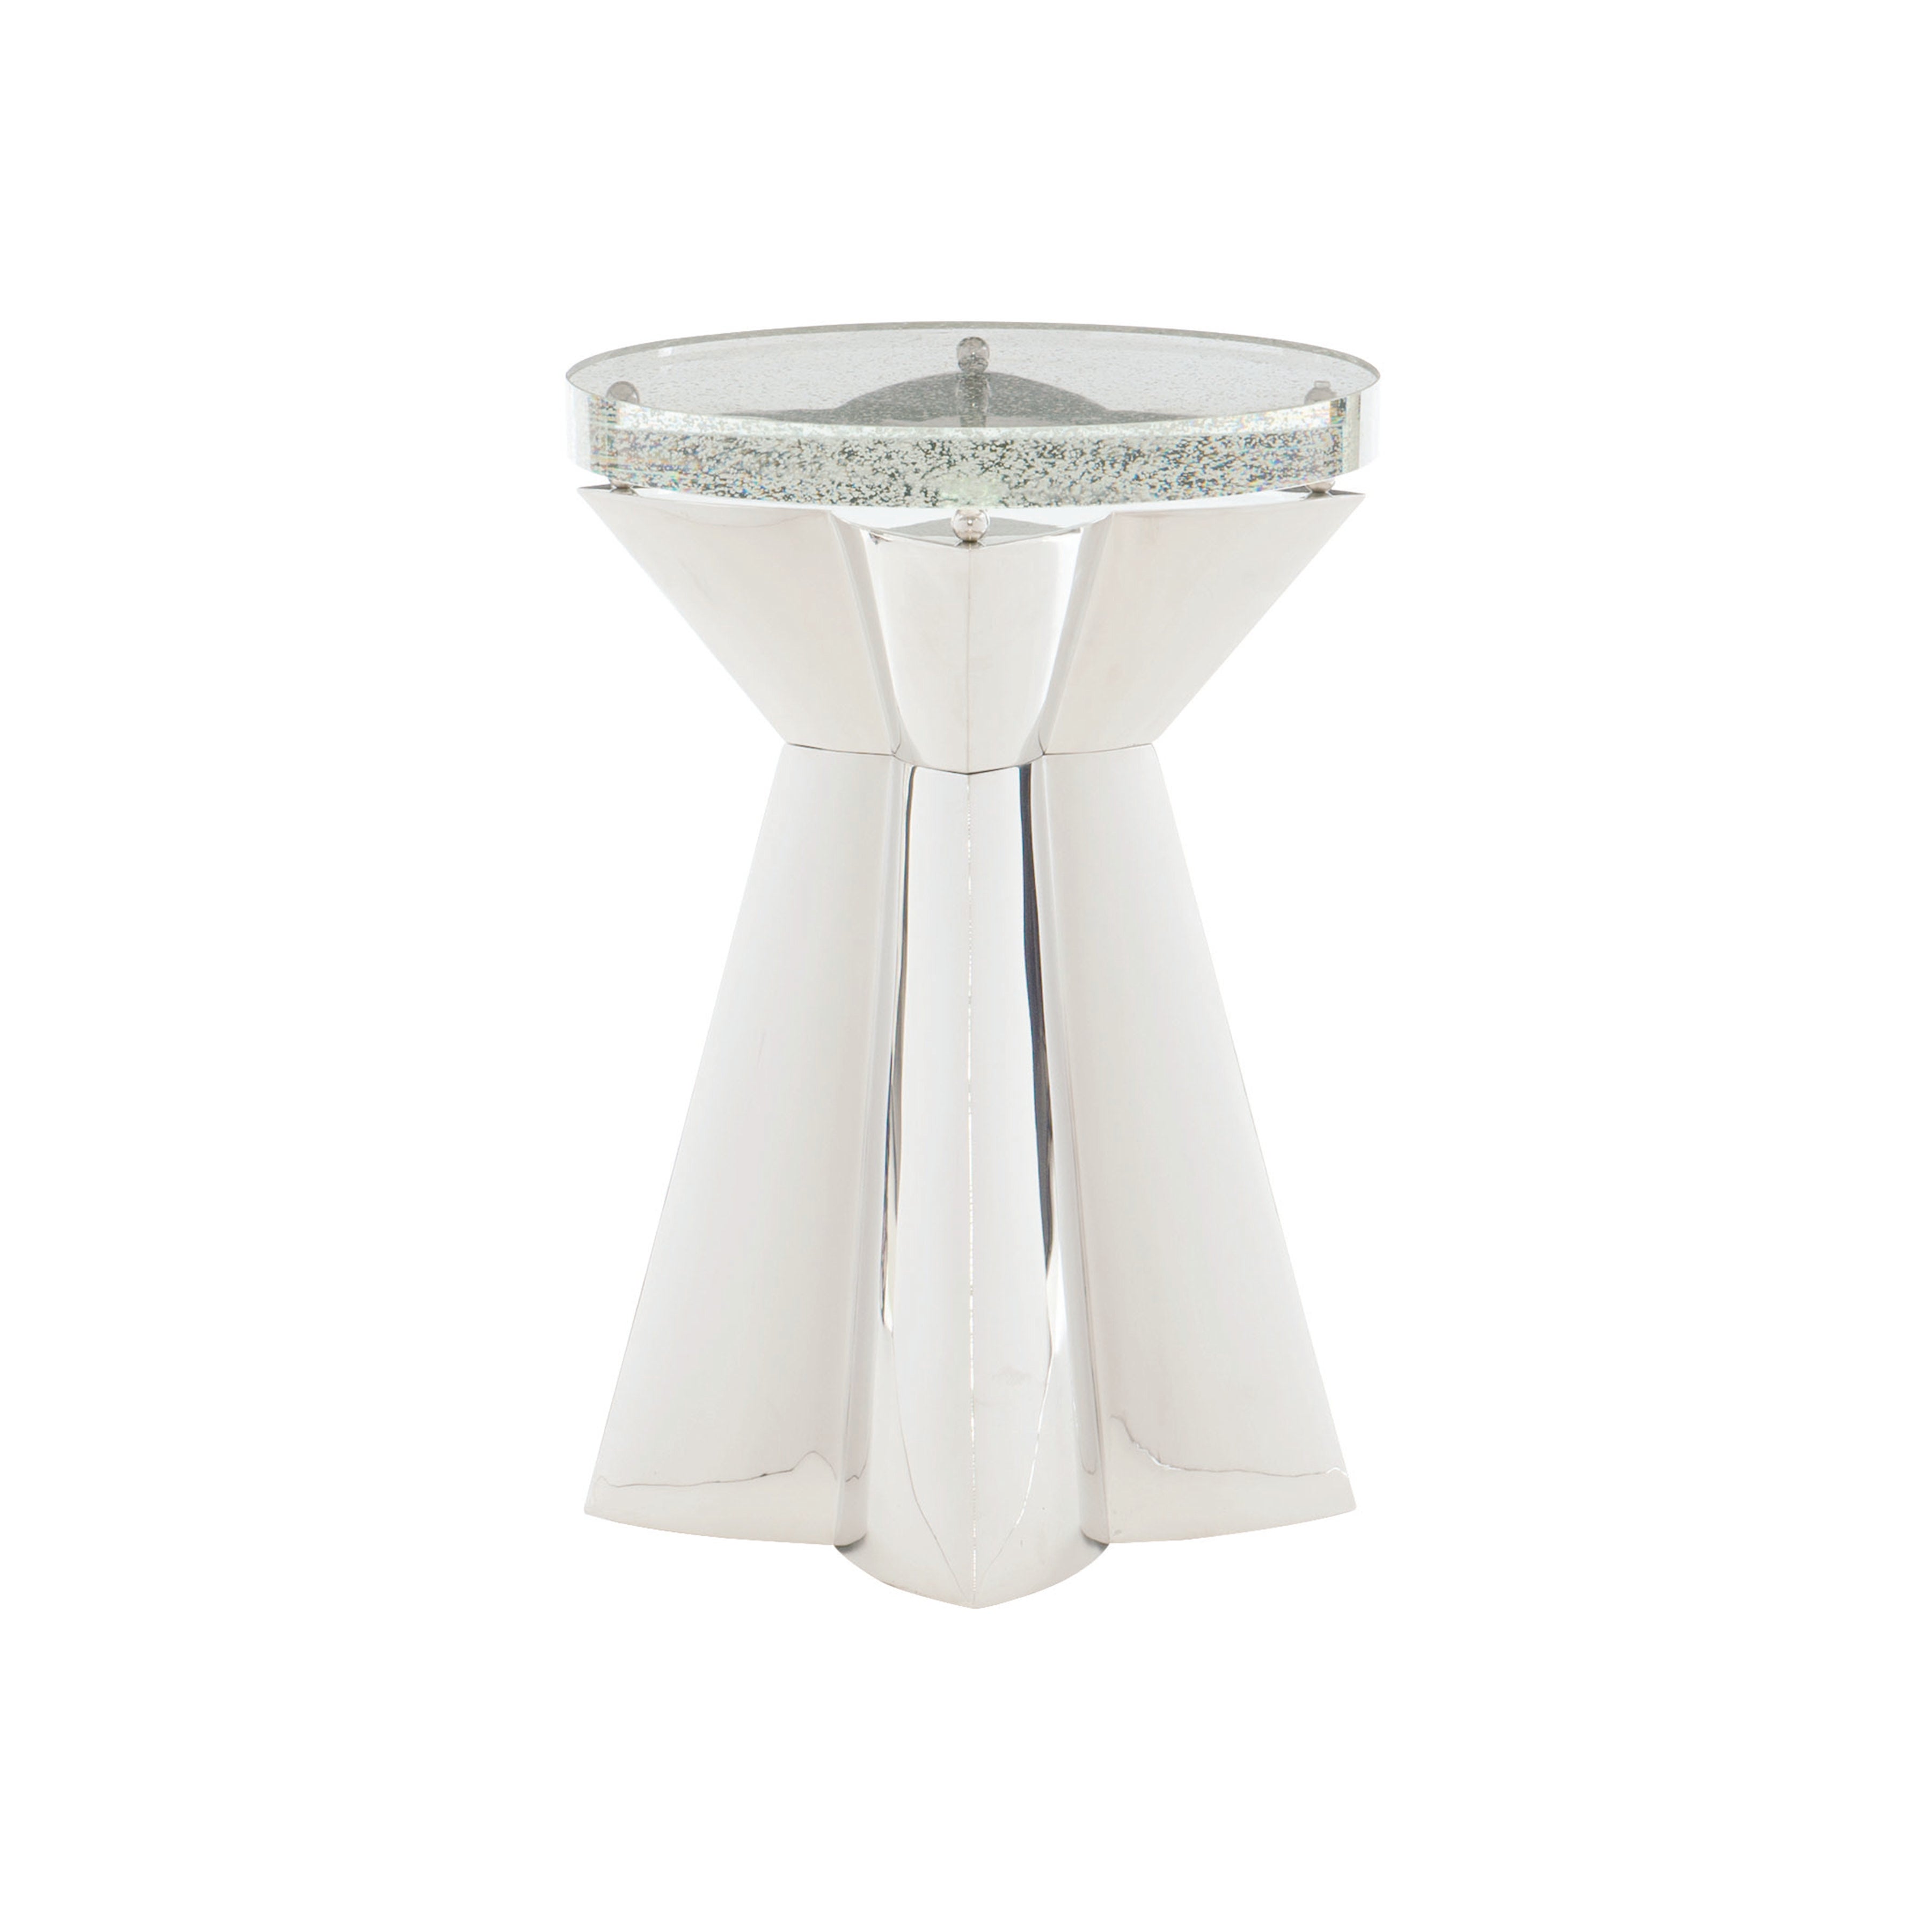 Anika Round Chairside Table